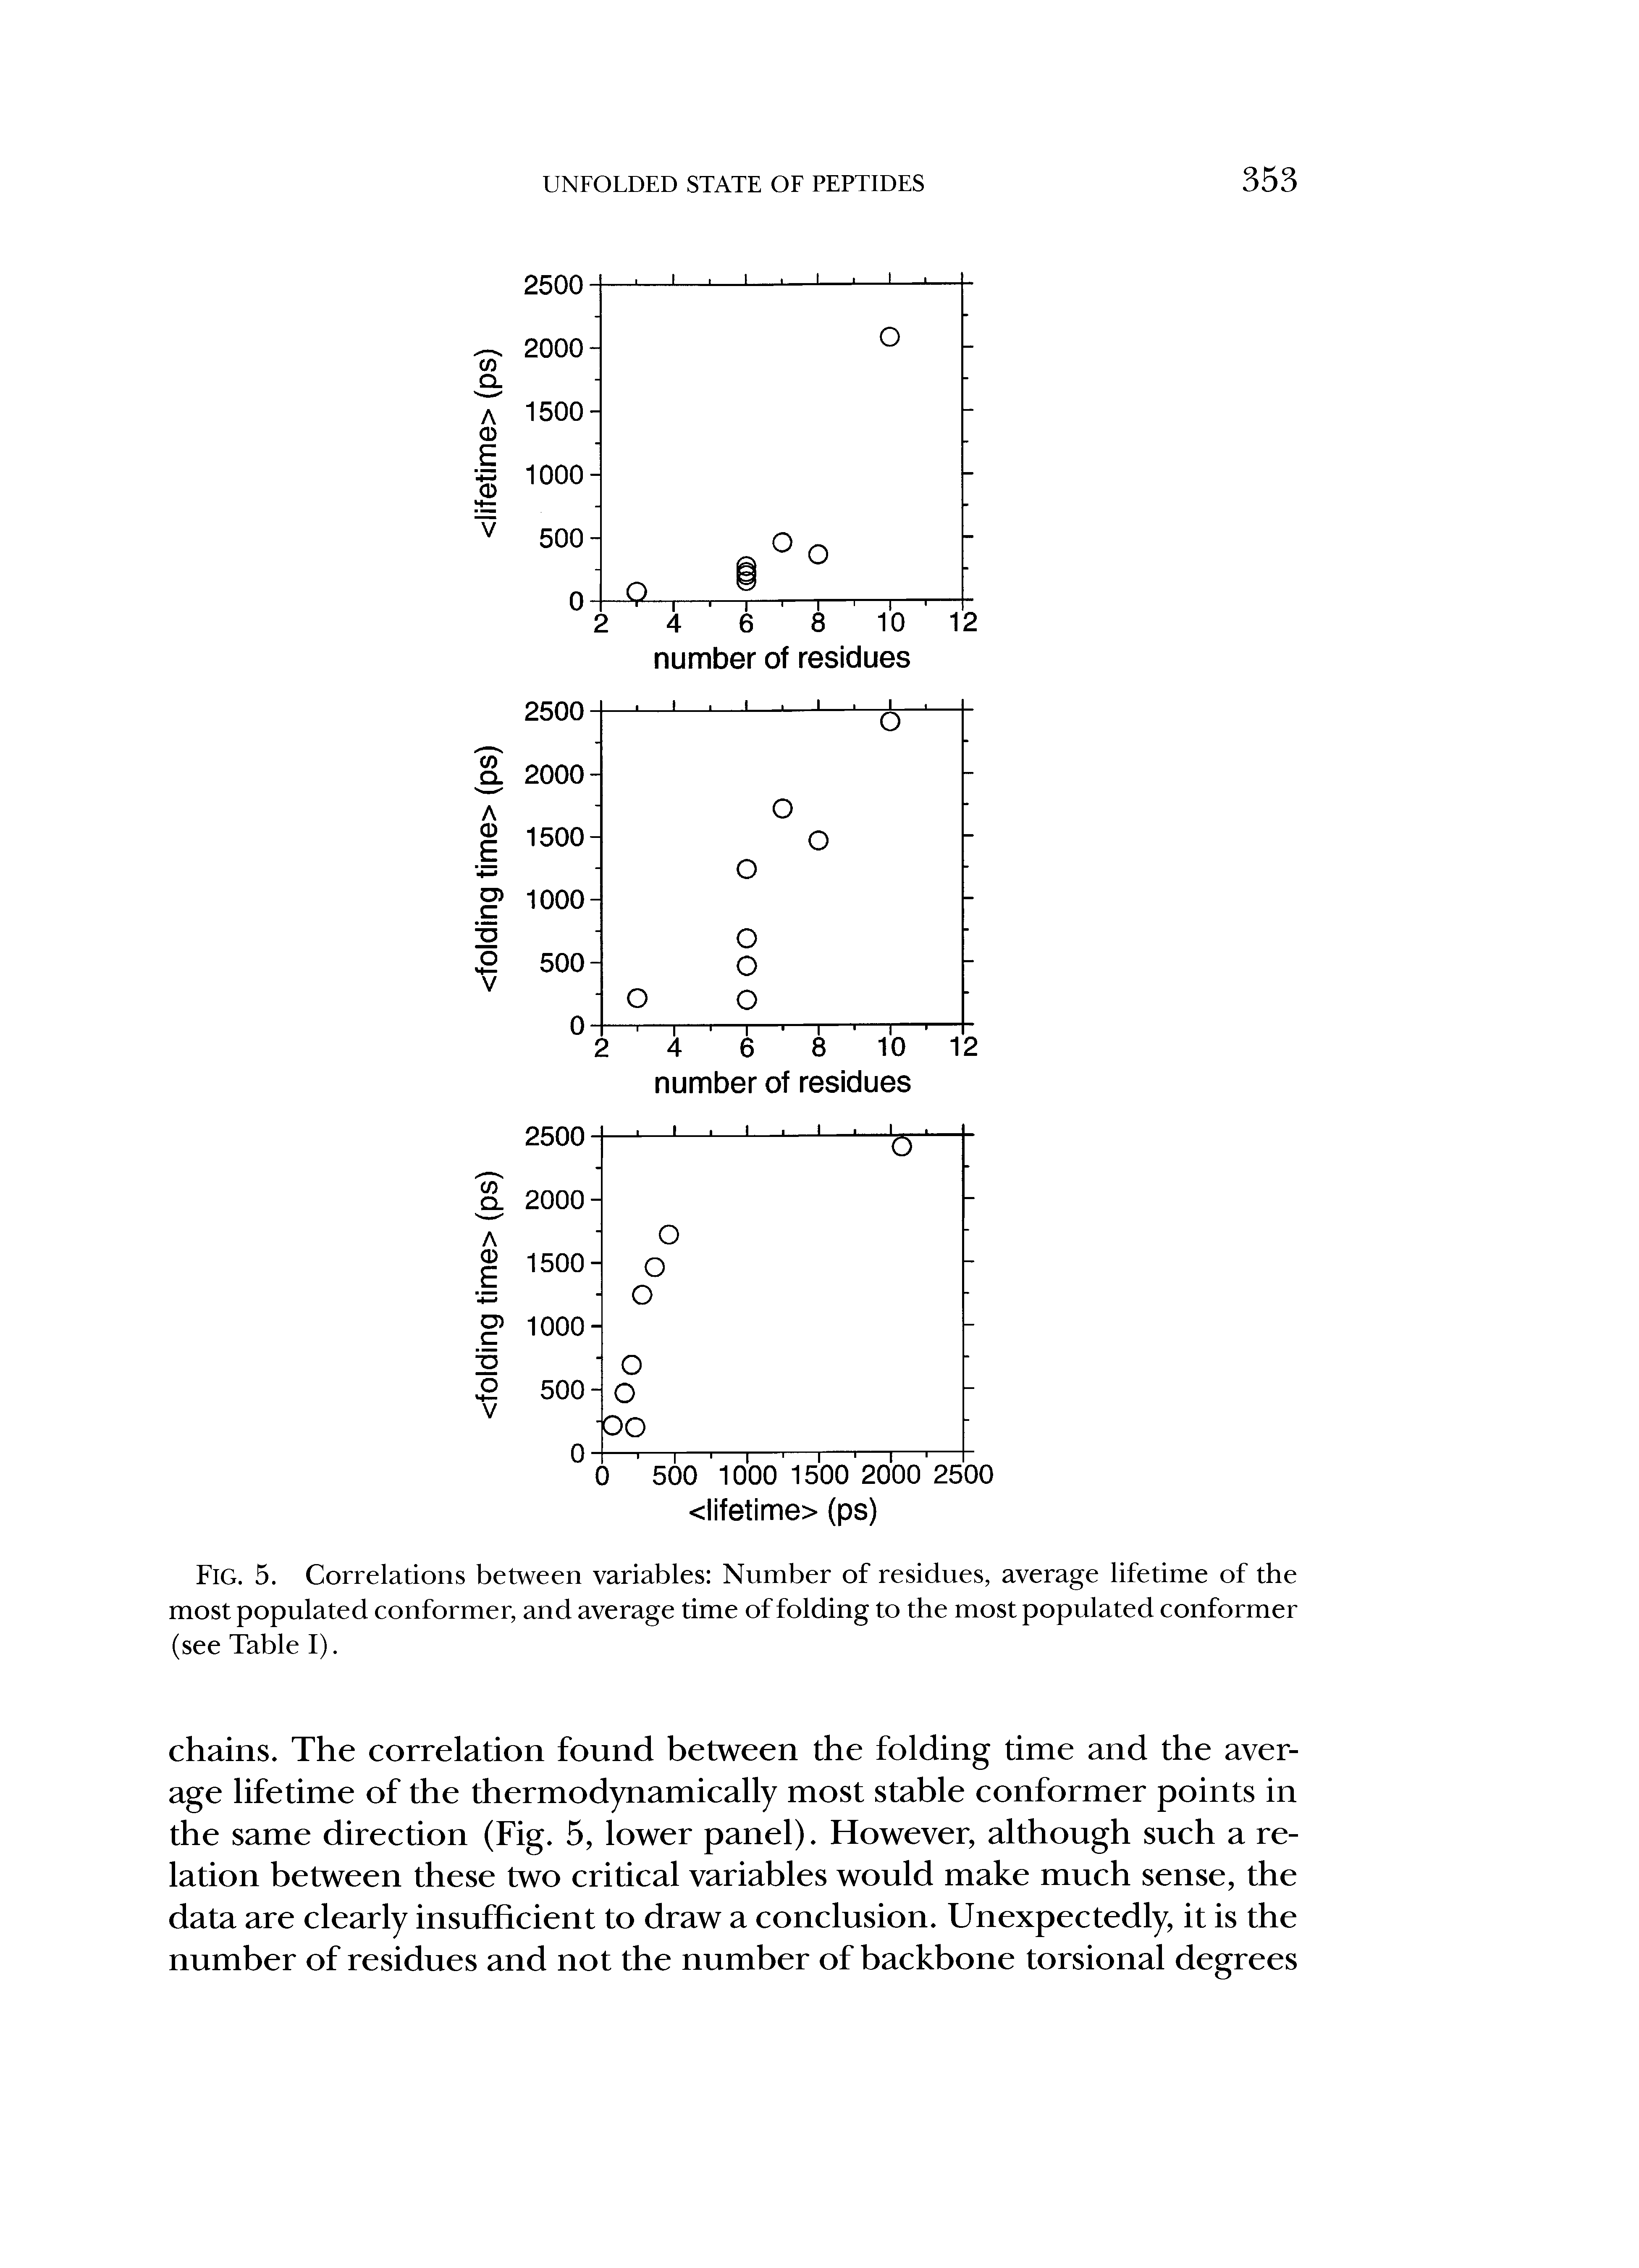 Fig. 5. Correlations between variables Number of residues, average lifetime of the most populated conformer, and average time of folding to the most populated conformer (see Table I).